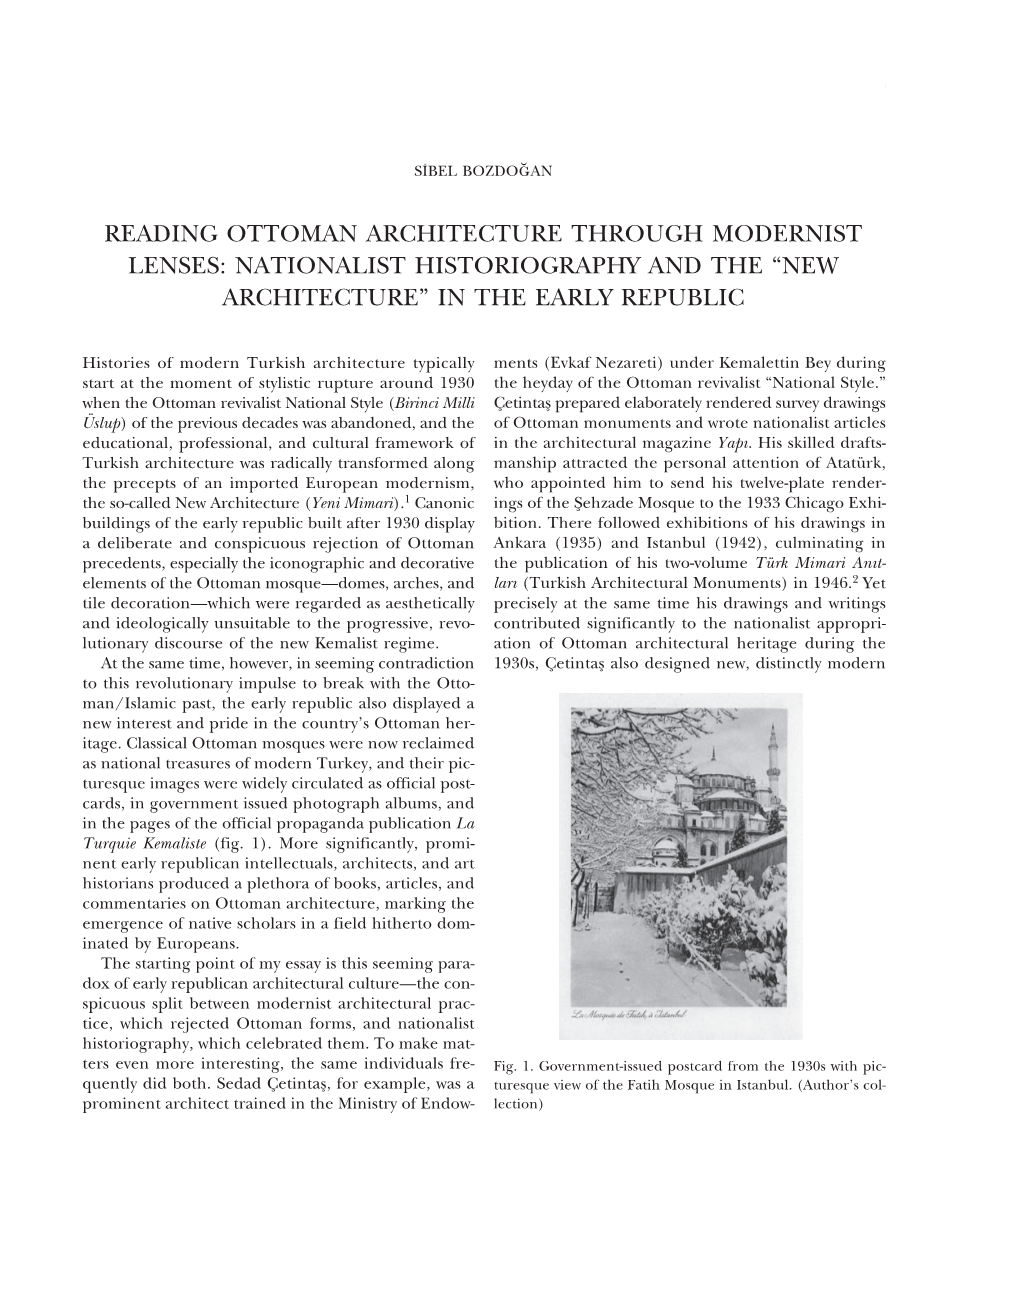 Nationalist Historiography and the “New Architecture” in the Early Republic 199